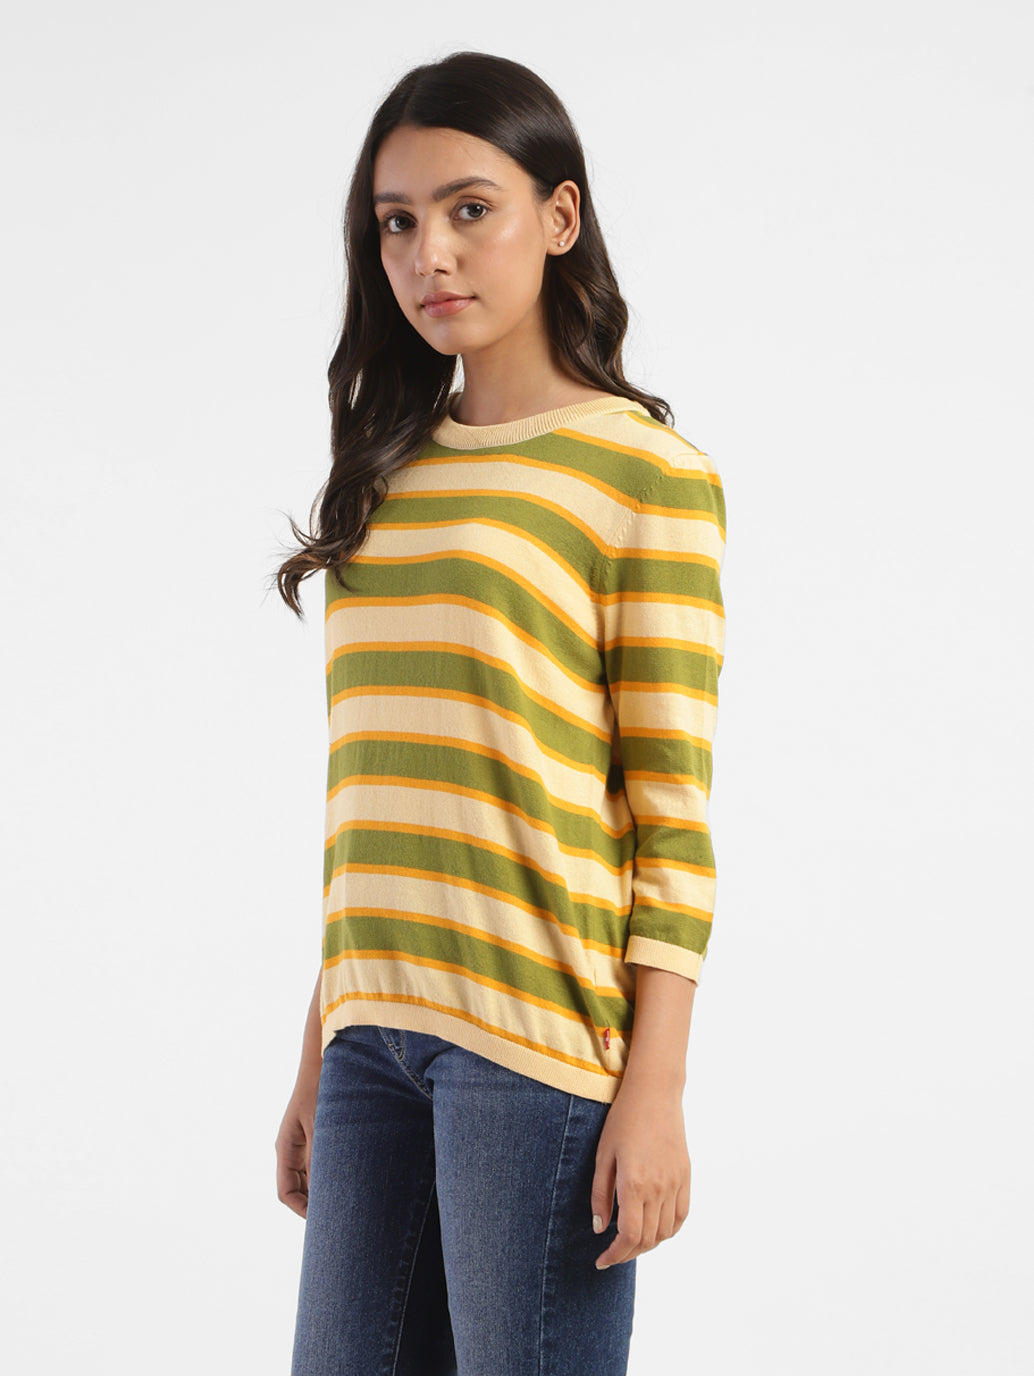 Women's Long Sweaters, Explore our New Arrivals